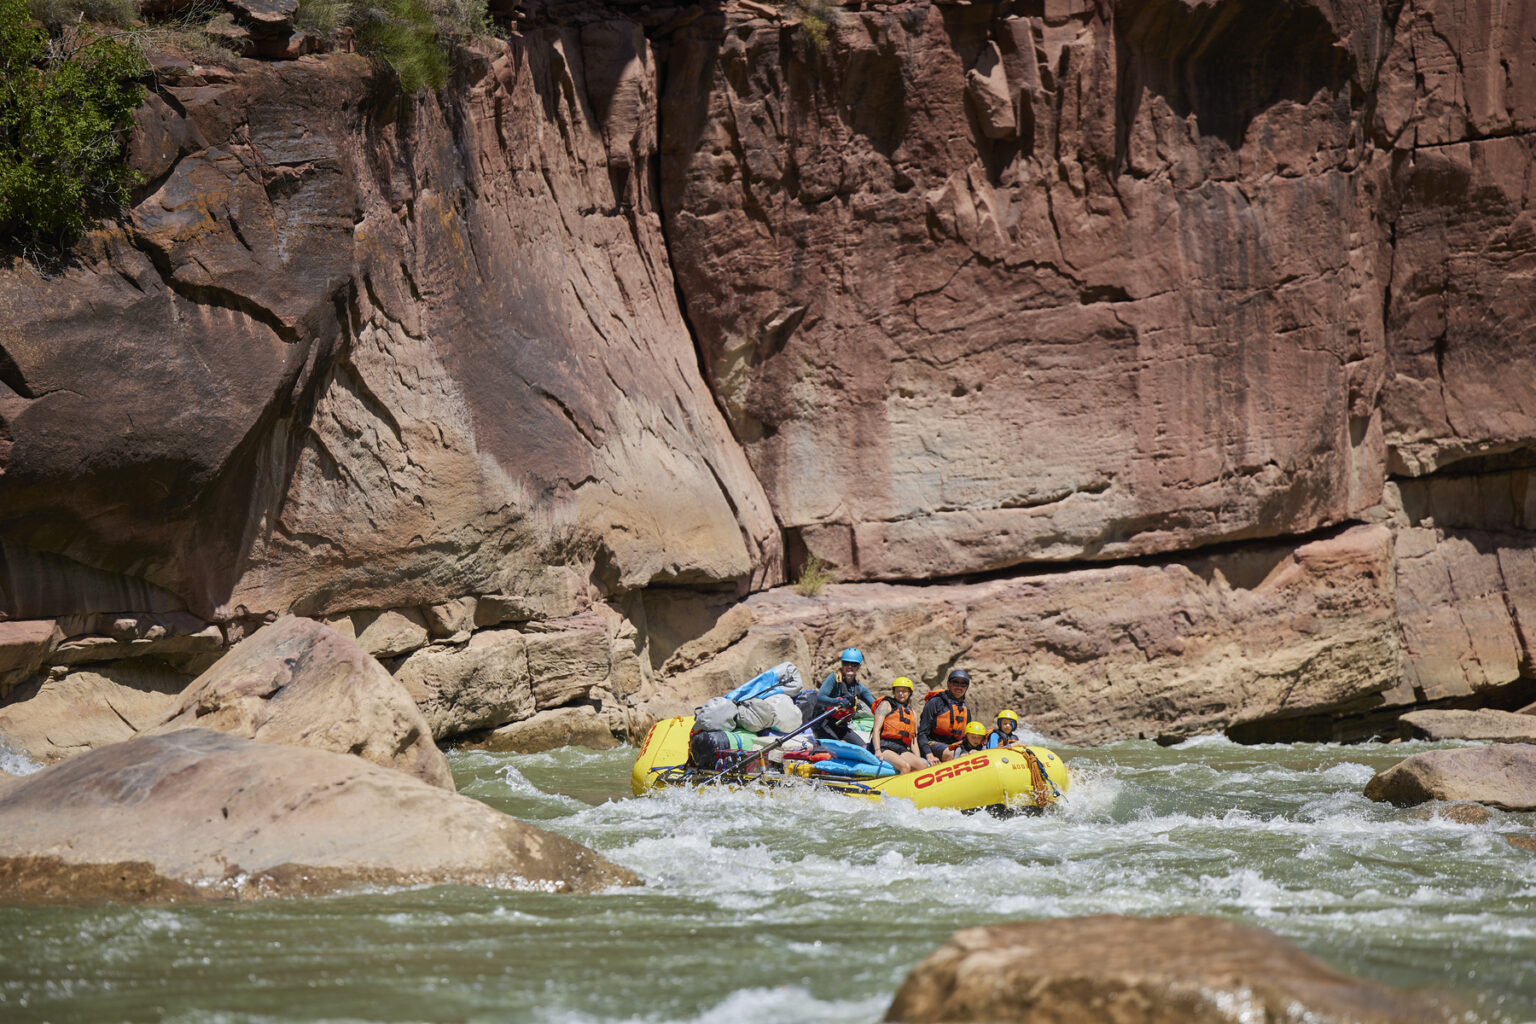 A family rafts through a small rapid in a narrow river canyon in Utah's Gates of Lodore